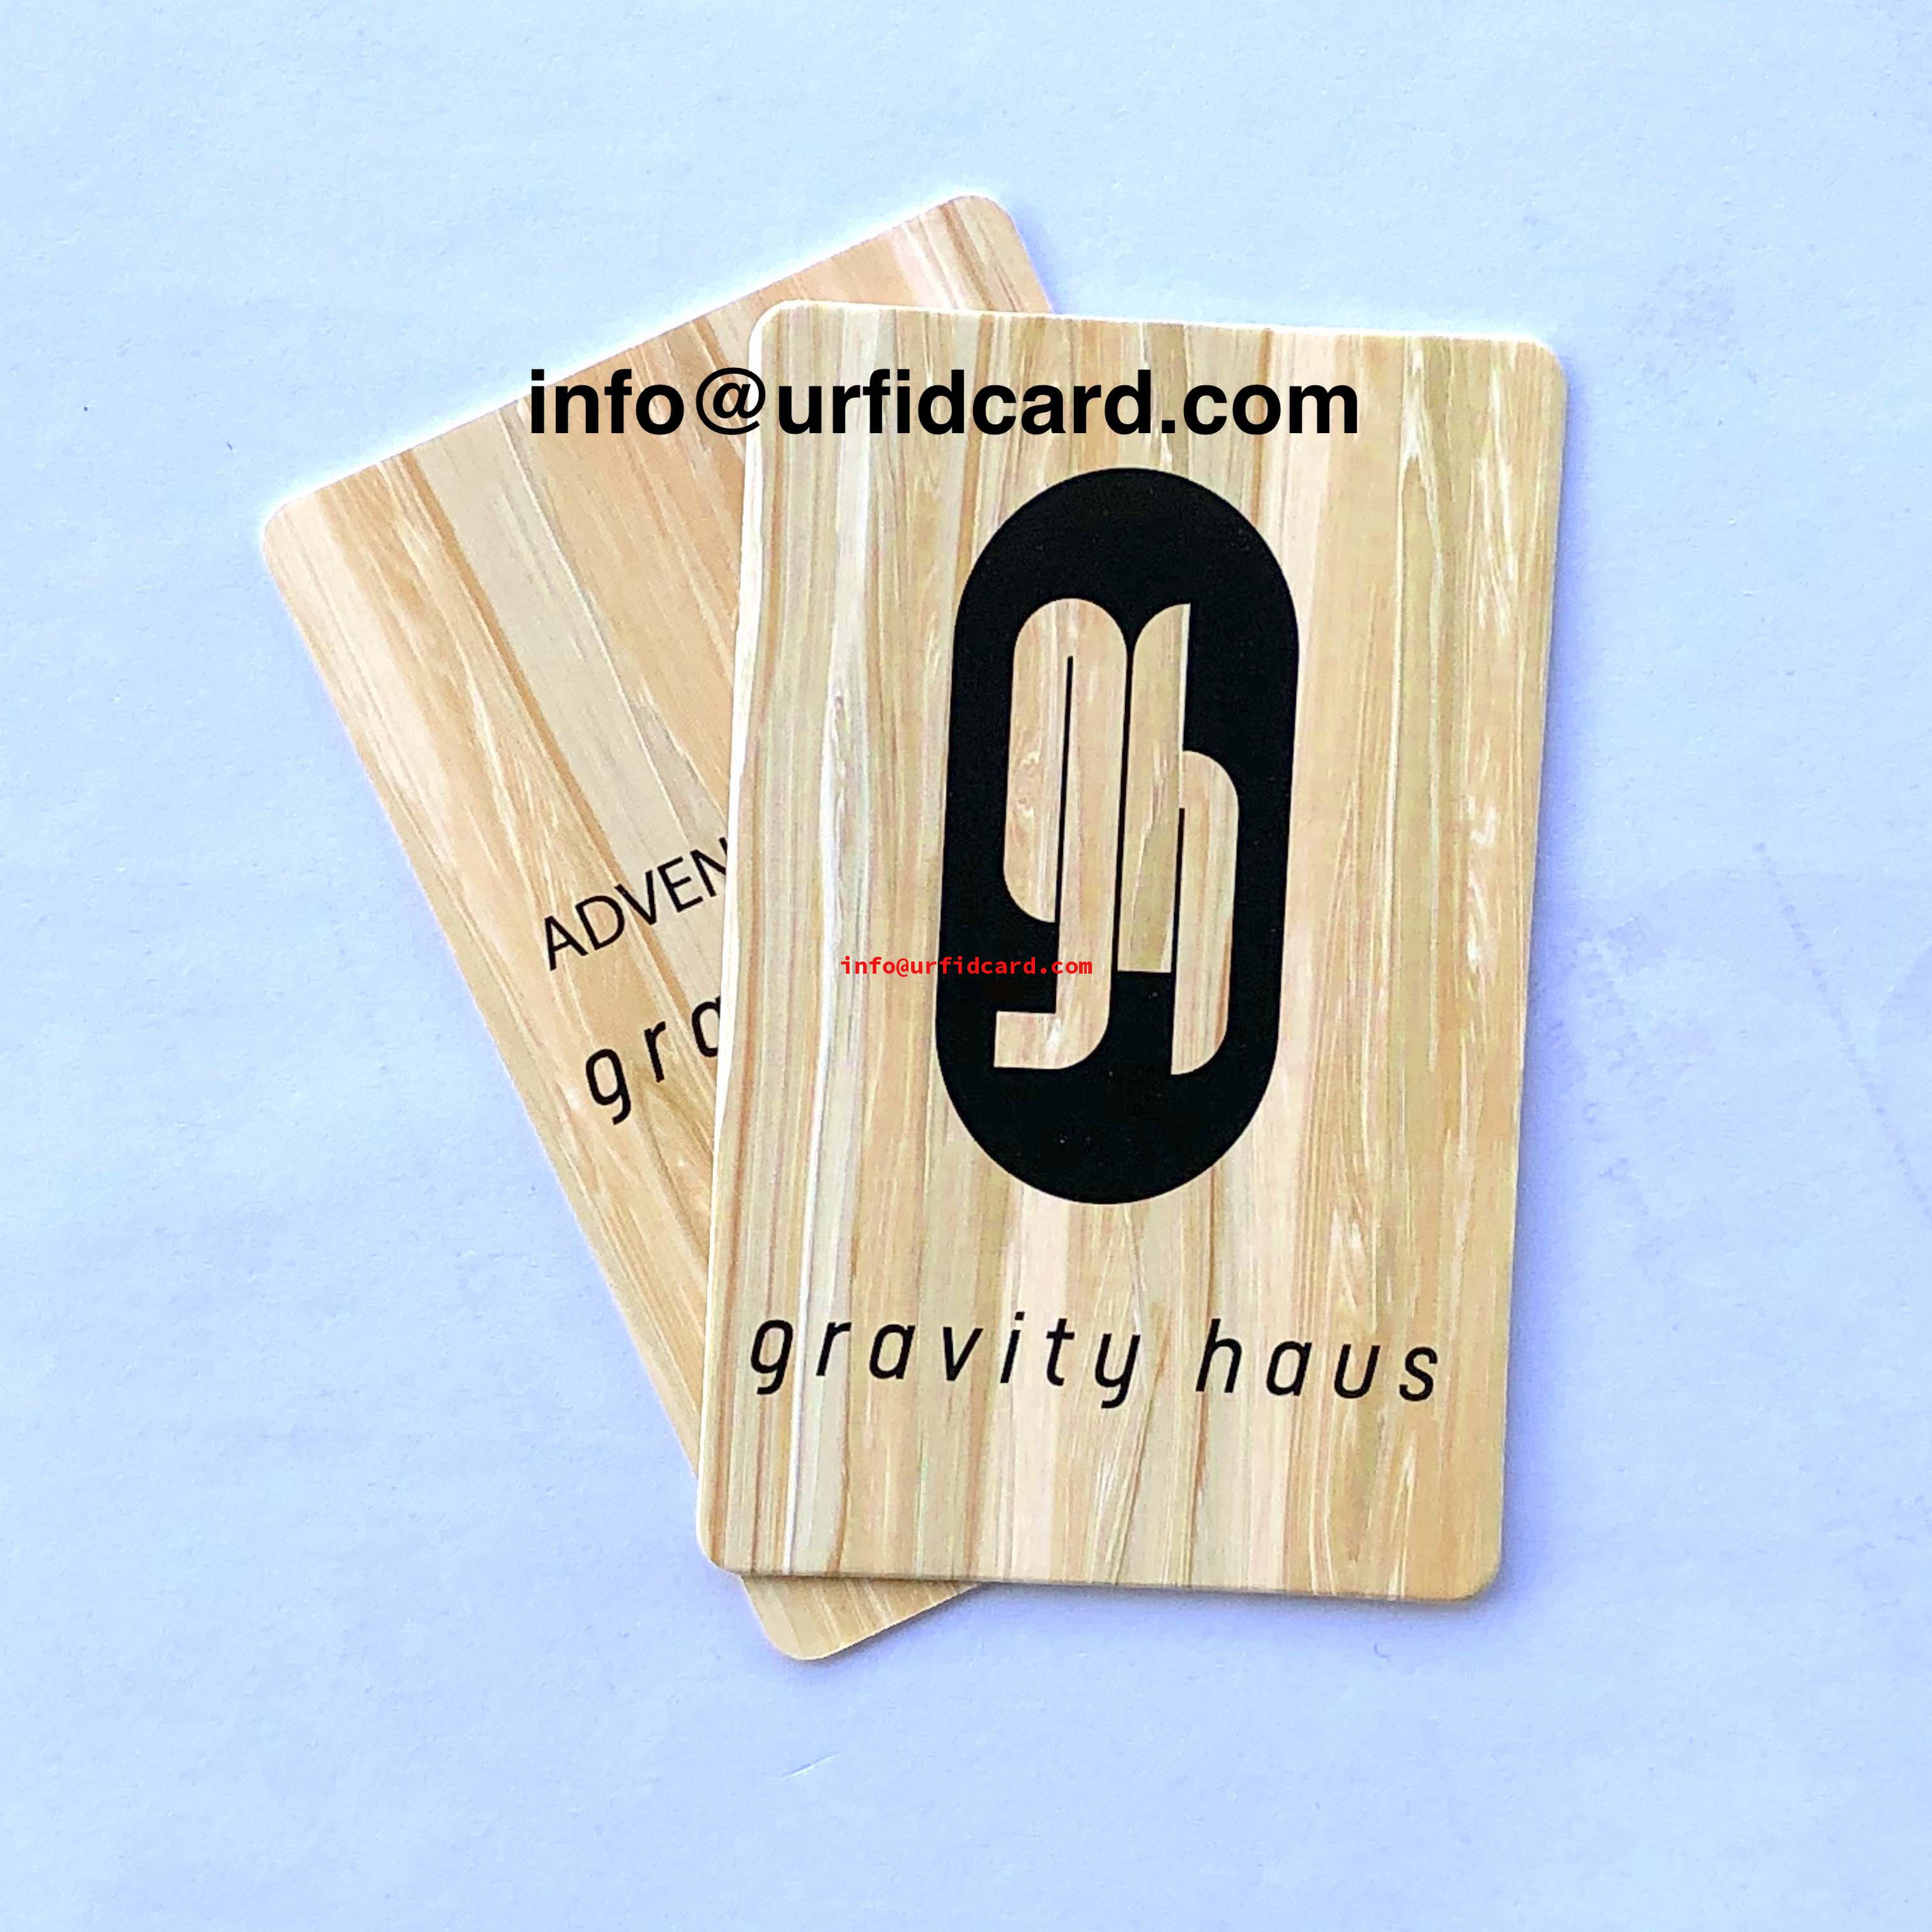  Plastic Free Hotel Key Card Made Entirely From Wood Fibre